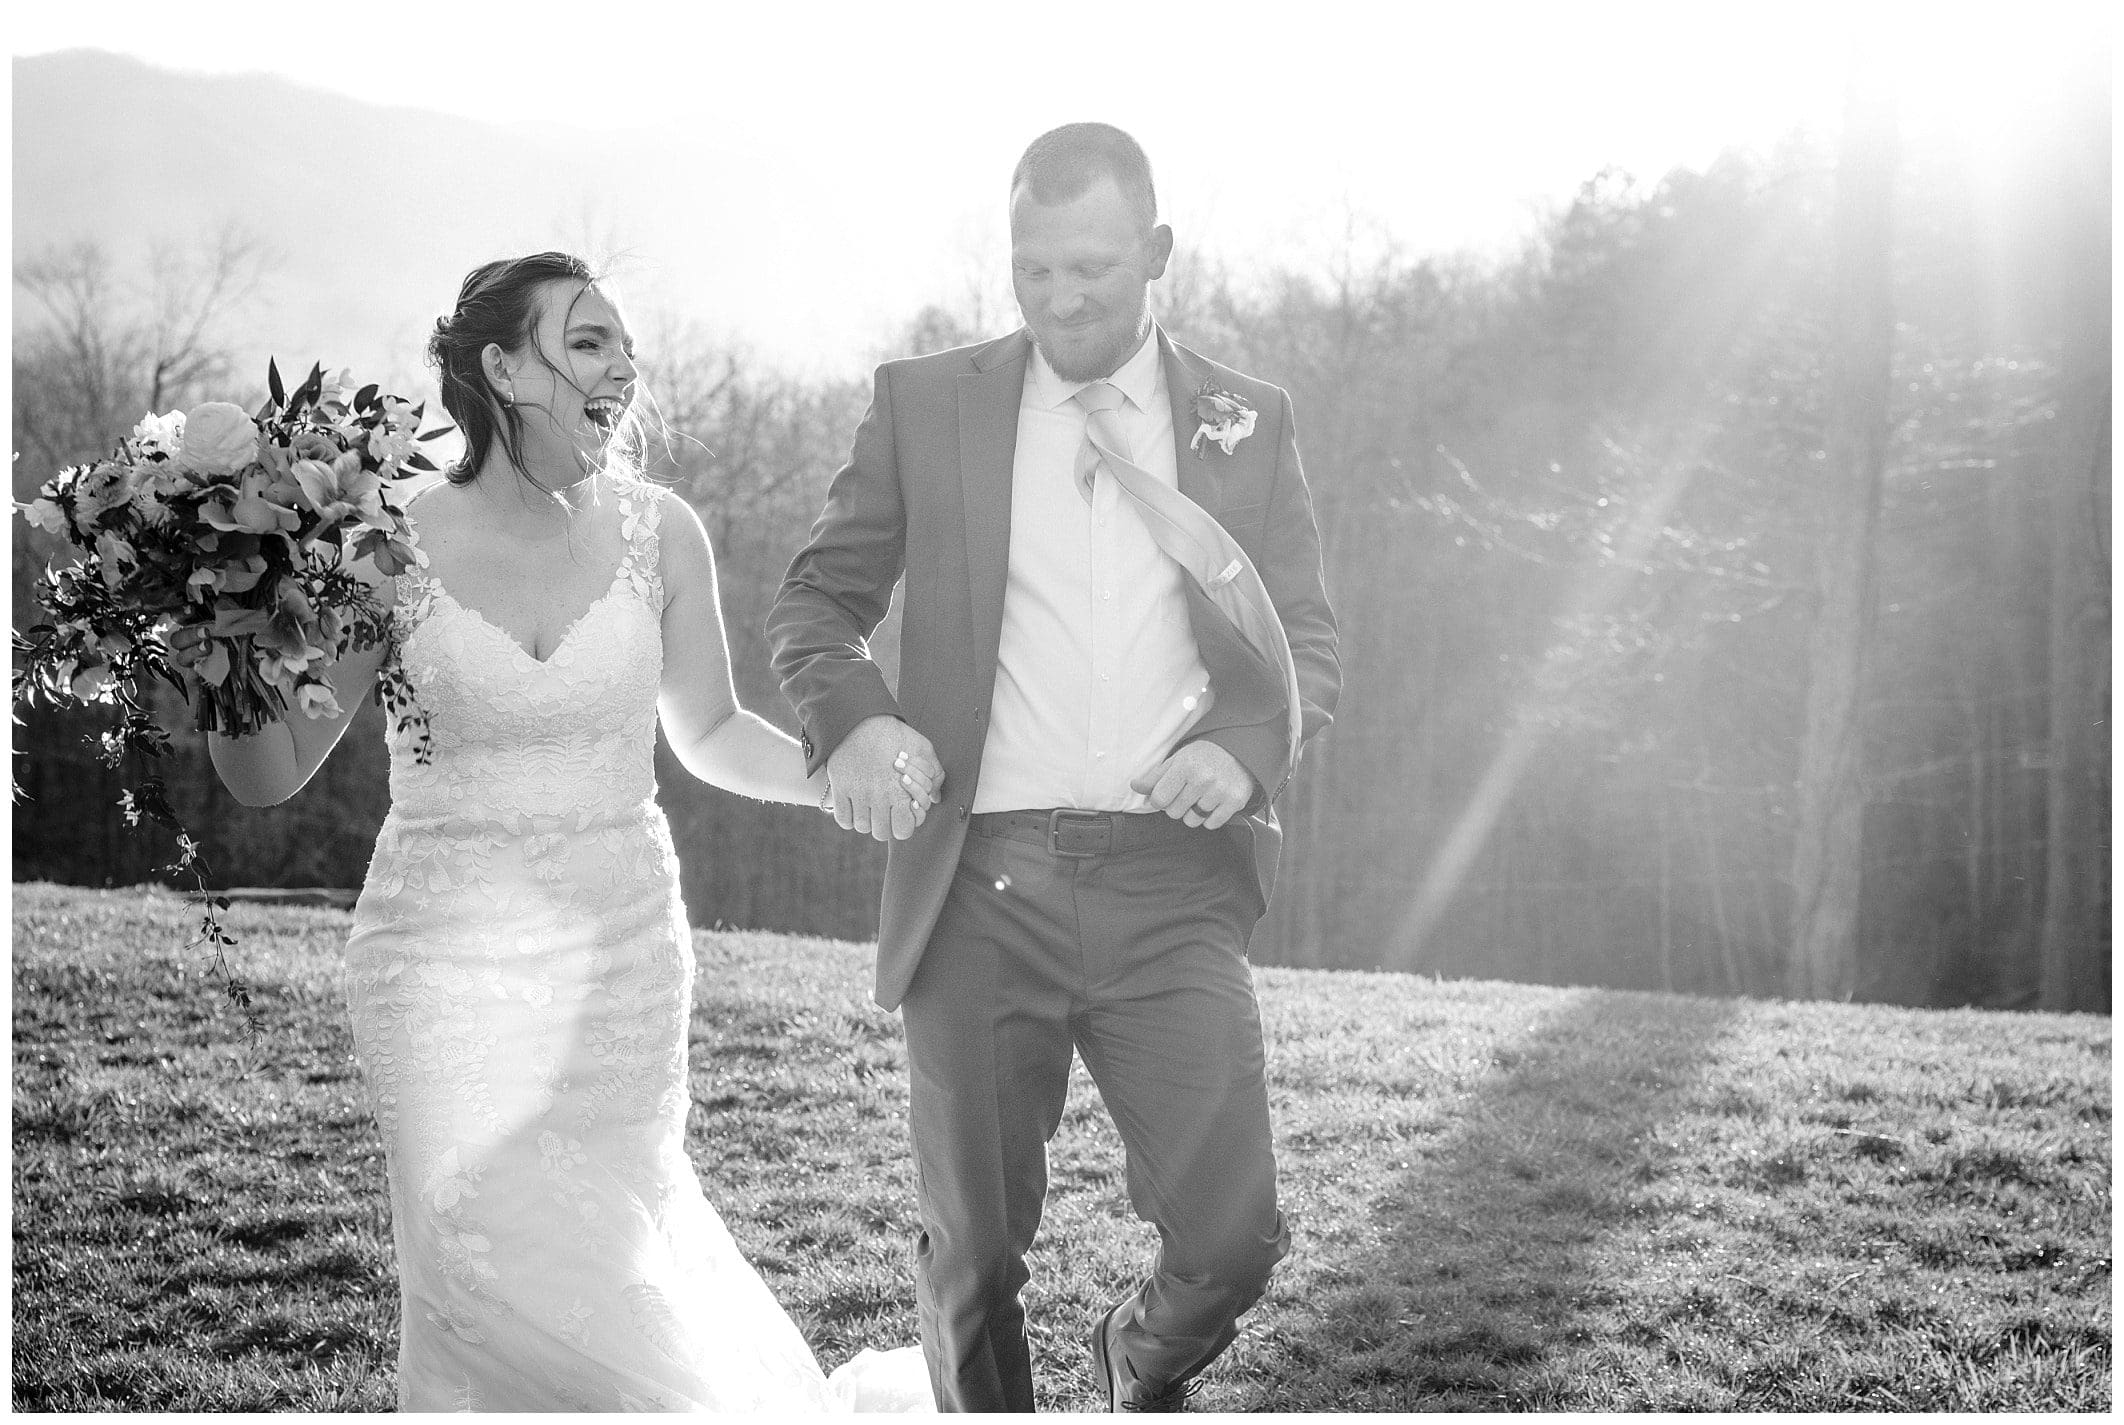 Black and whie joyfful spring wedding with bride and groom holding hands and laughing